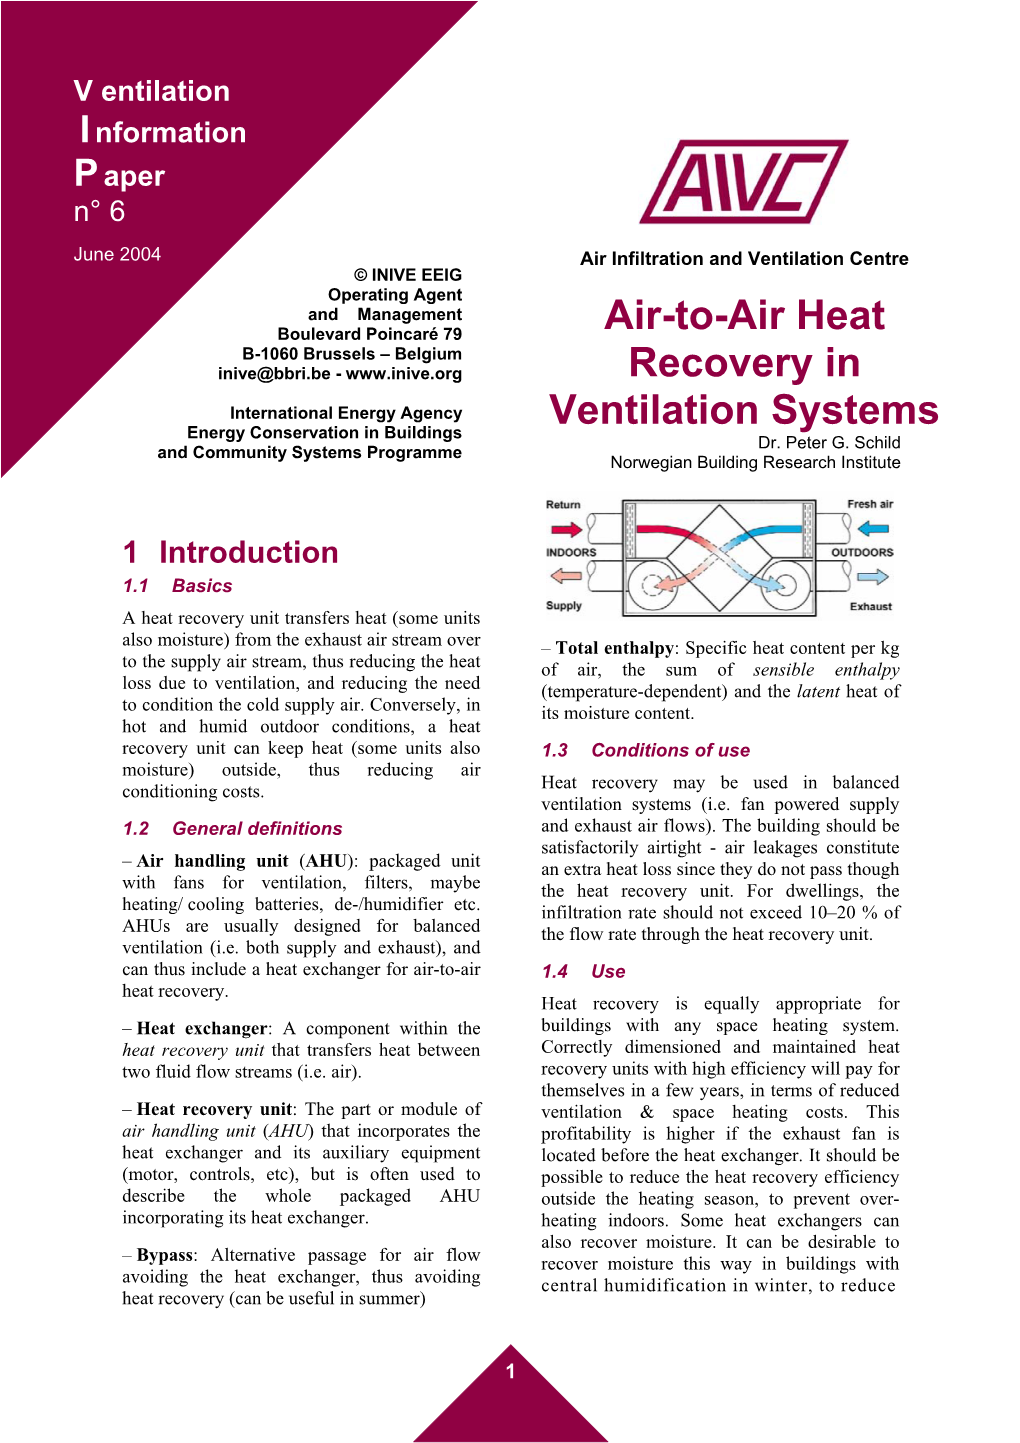 Air-To-Air Heat Recovery in Ventilation Systems